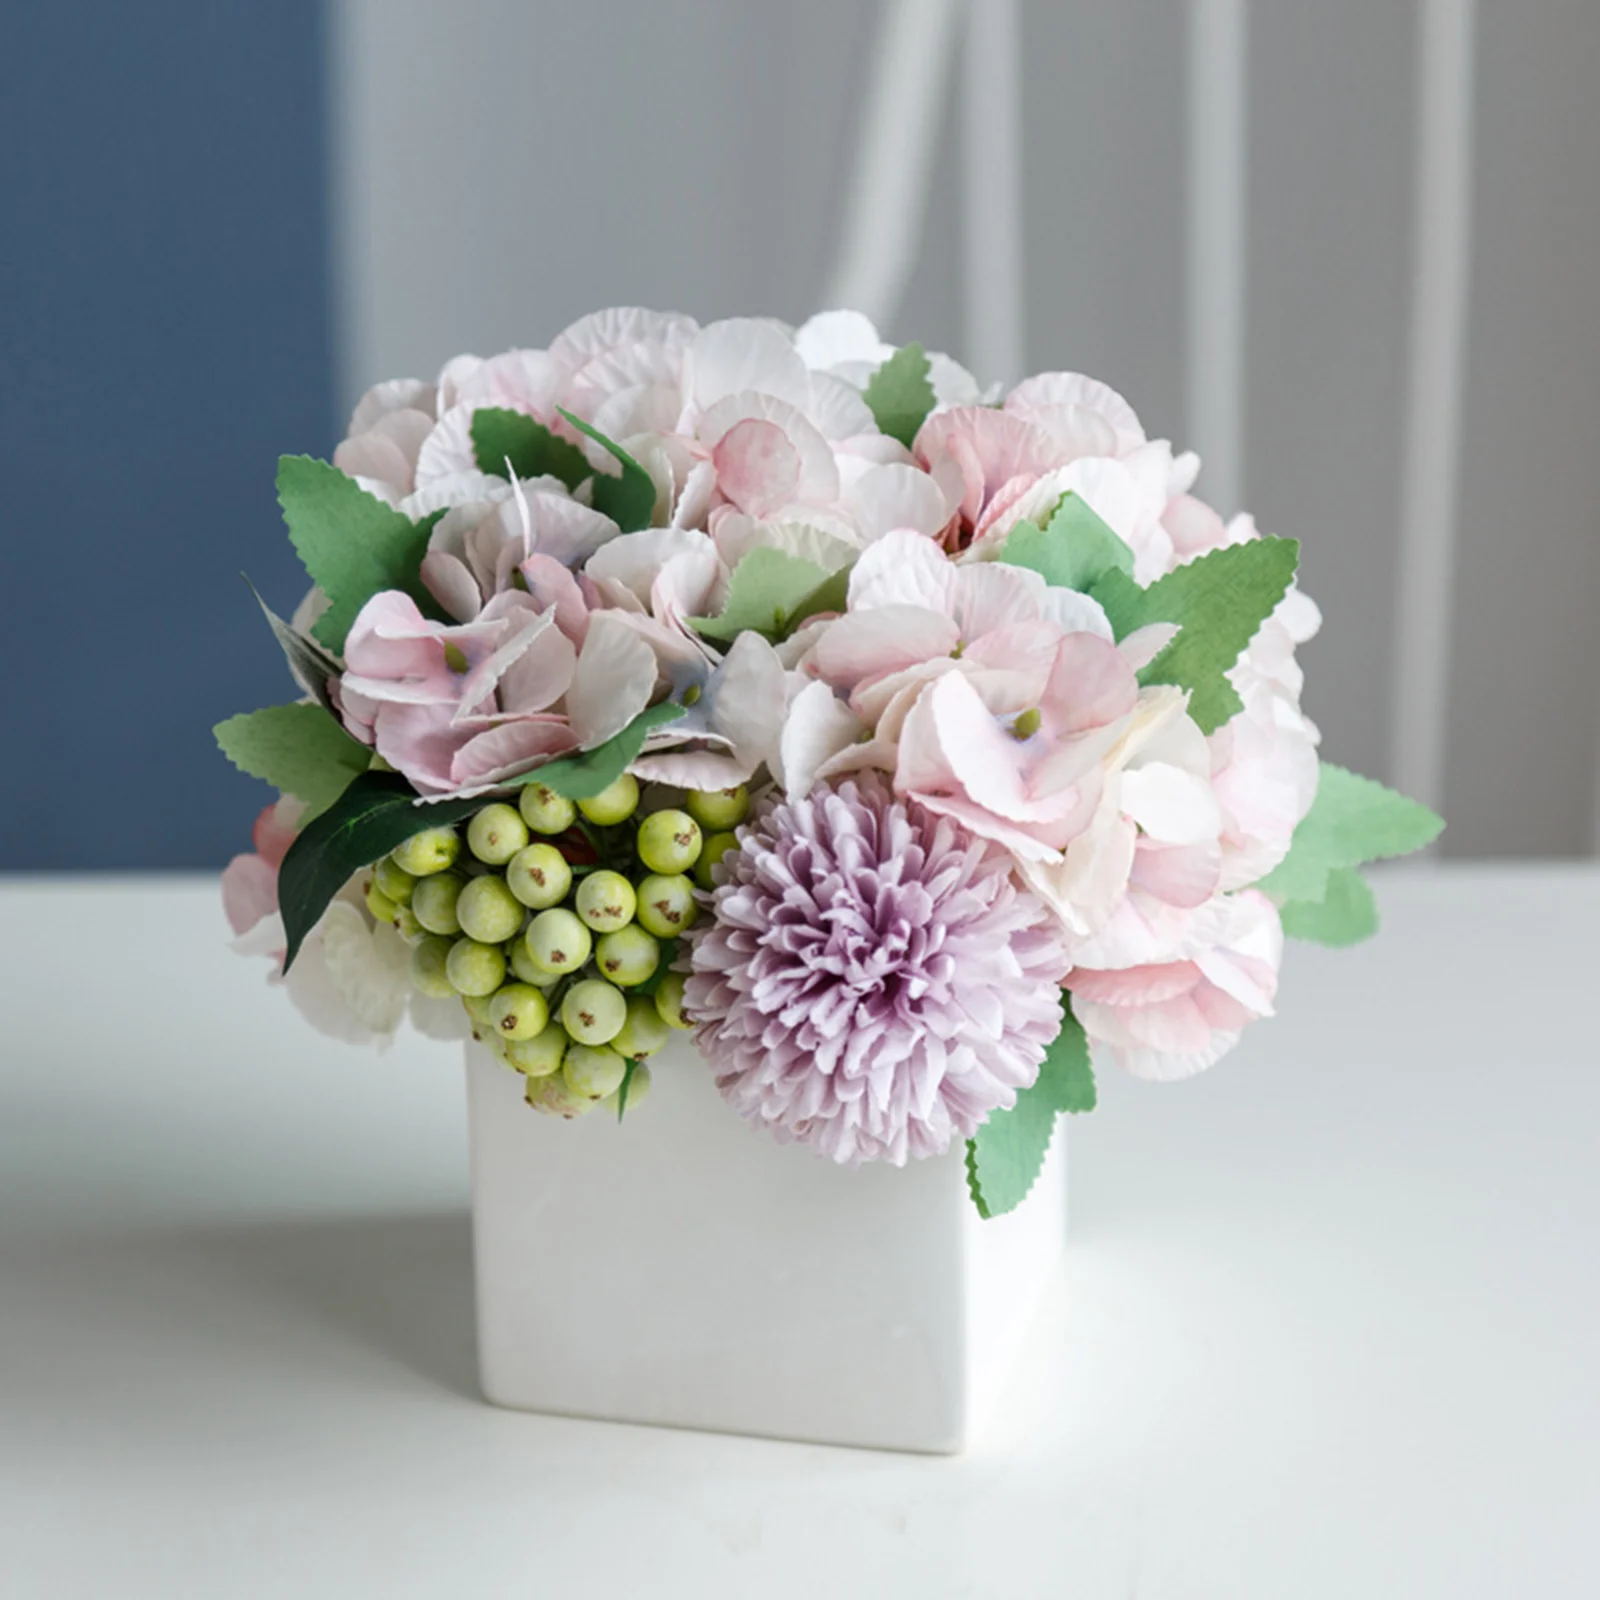 Artificial Flowers Hydrangea With Ceramic Vase Silk Potted Flower Home Decor